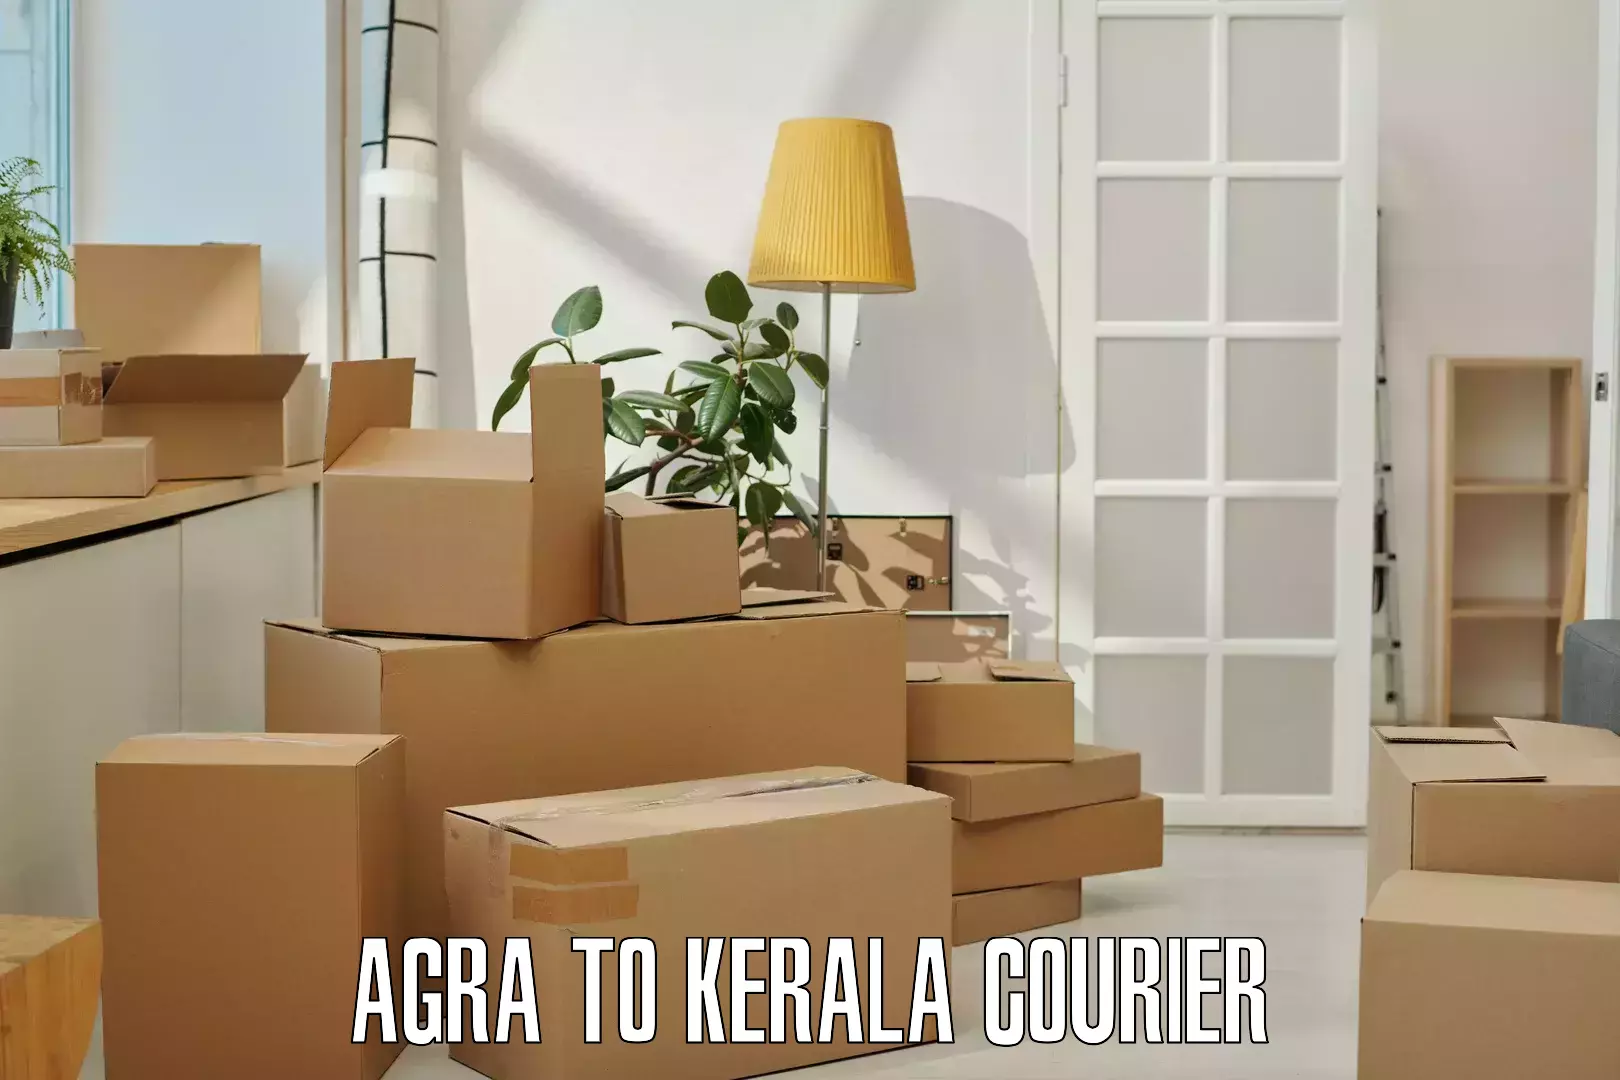 Advanced courier platforms Agra to Cochin University of Science and Technology